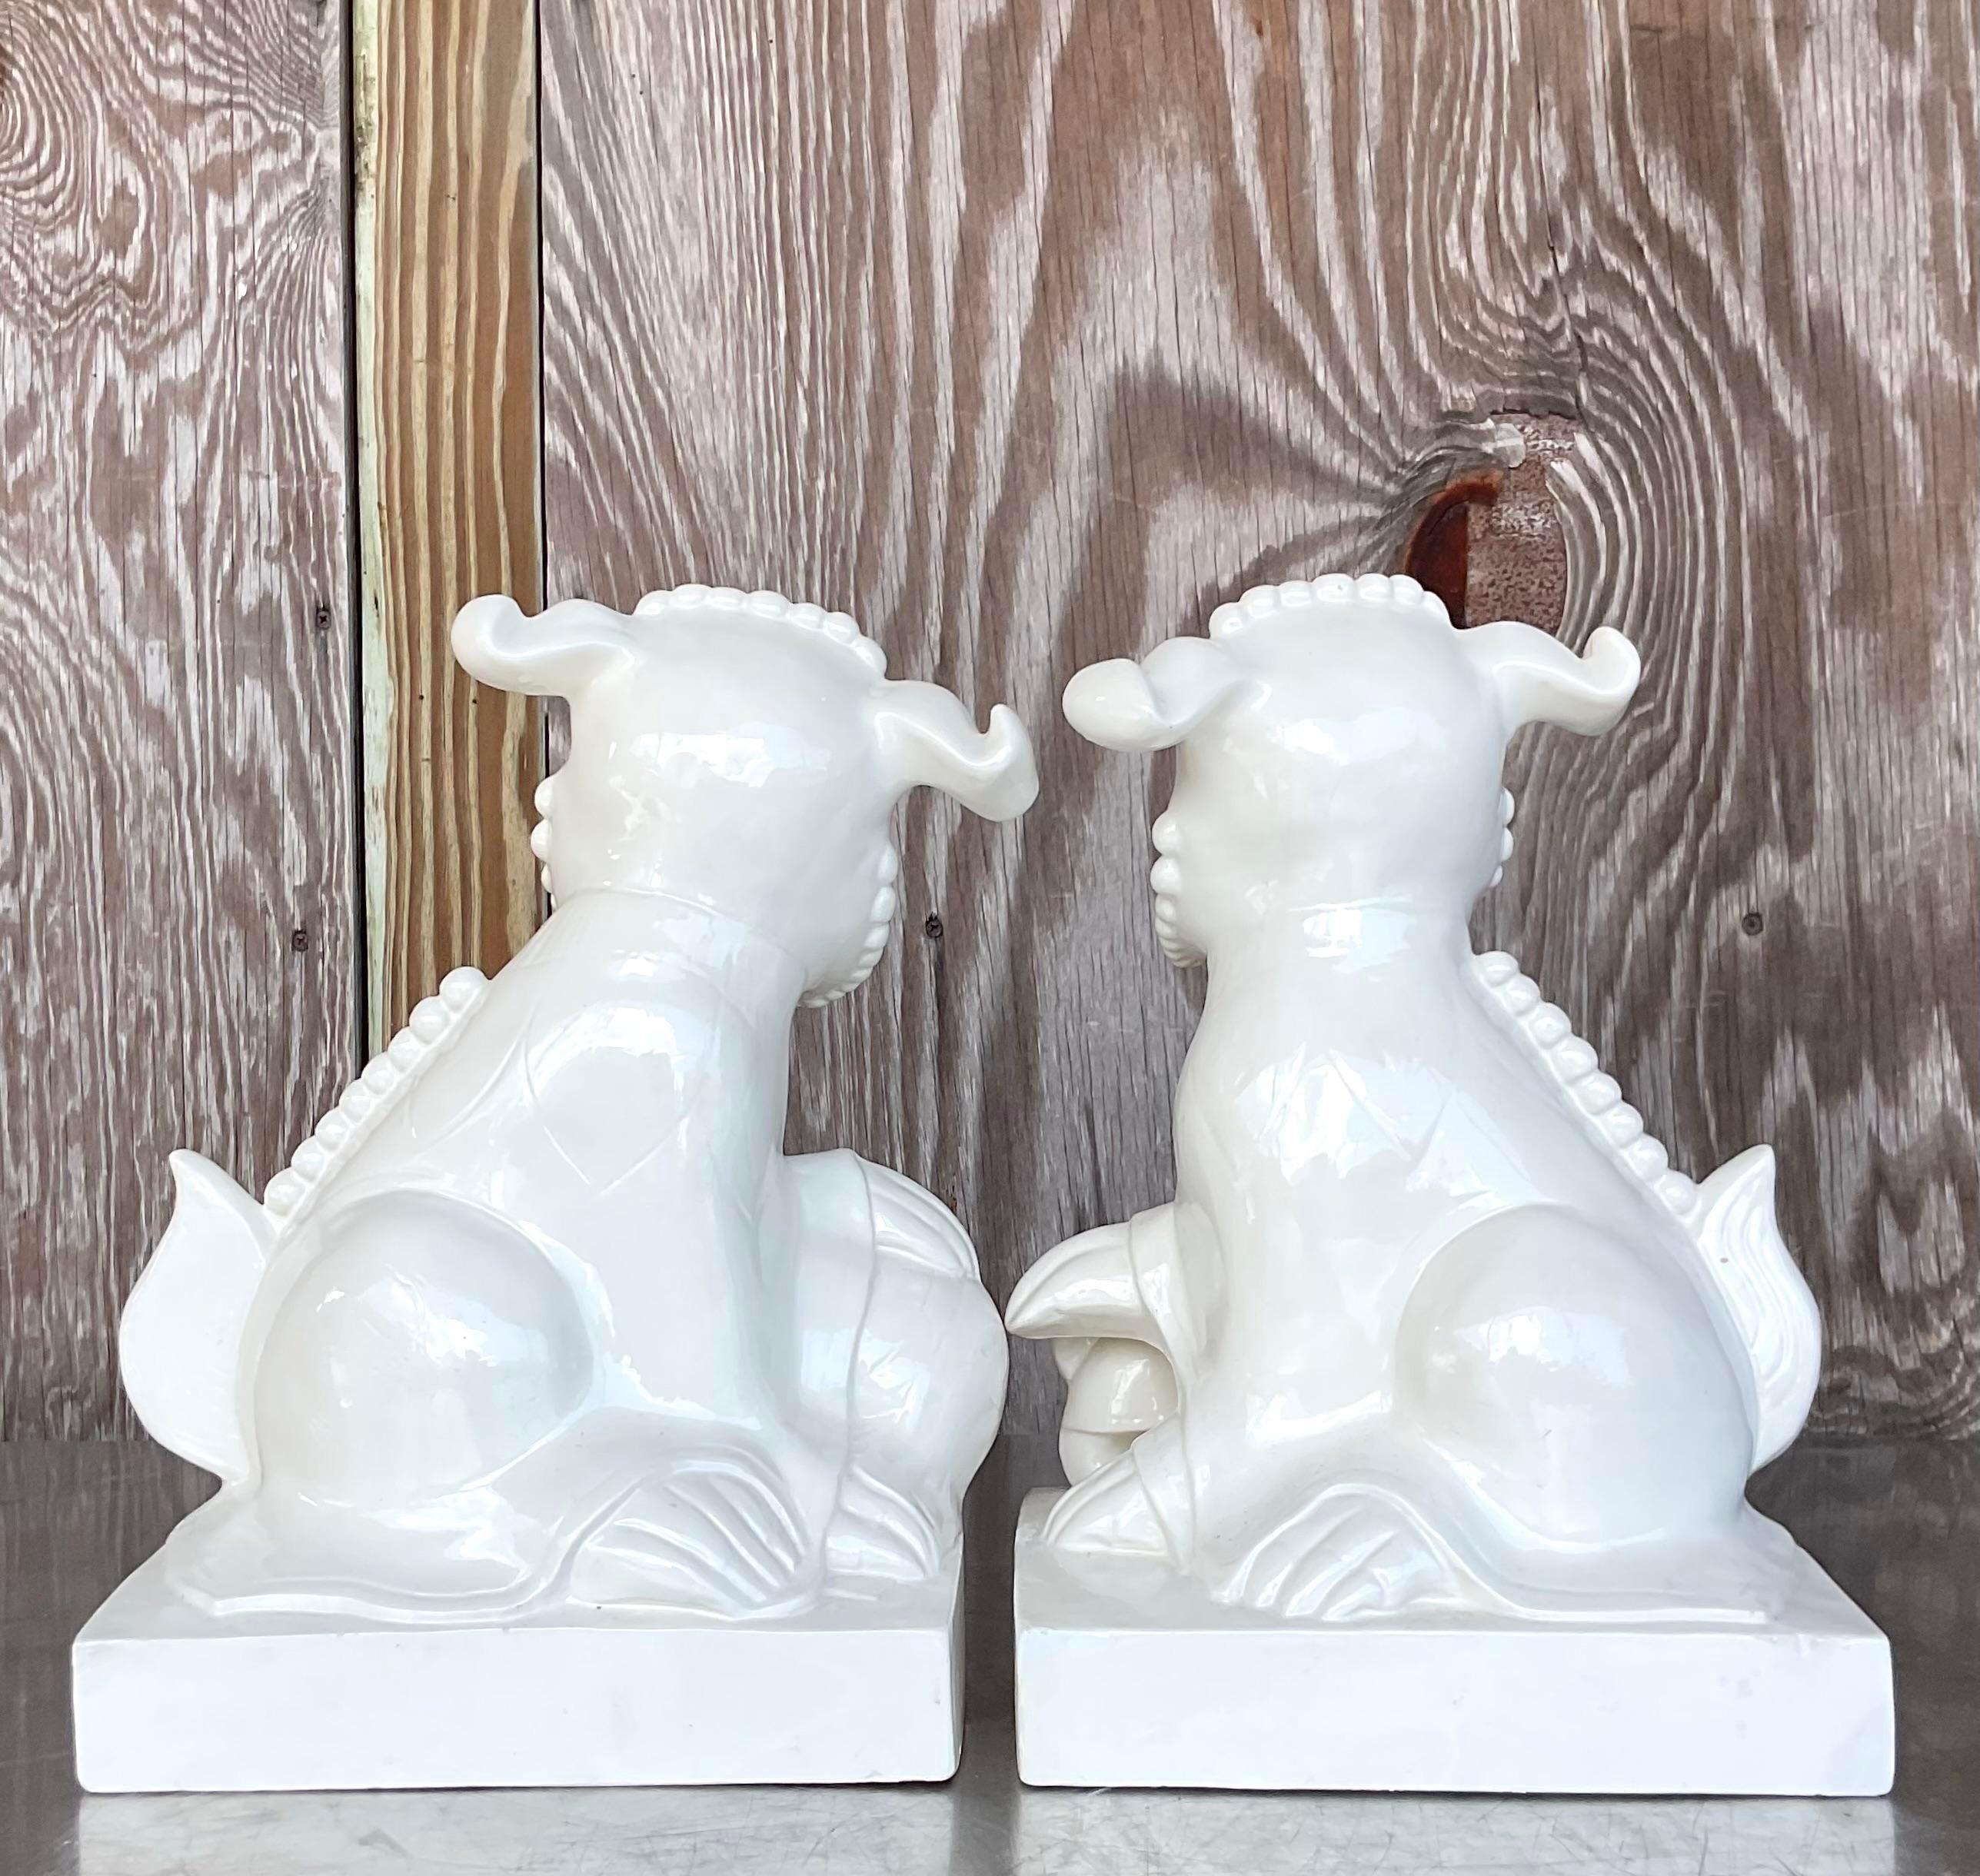 American Late 20th Century Vintage Asian Glazed Ceramic Foo Dogs - a Pair For Sale